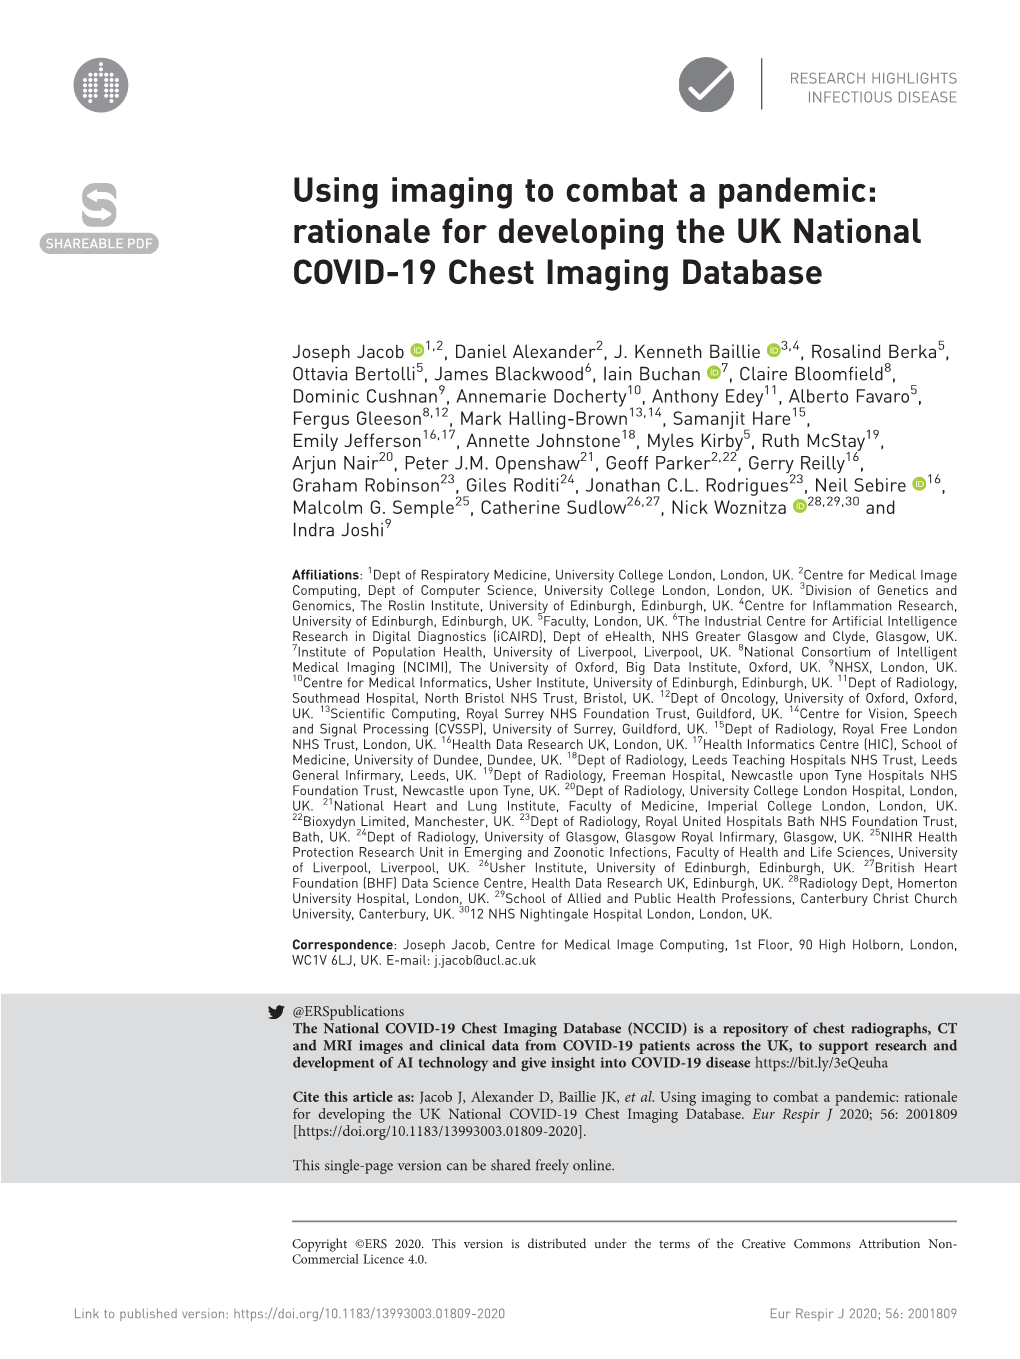 Rationale for Developing the UK National COVID-19 Chest Imaging Database